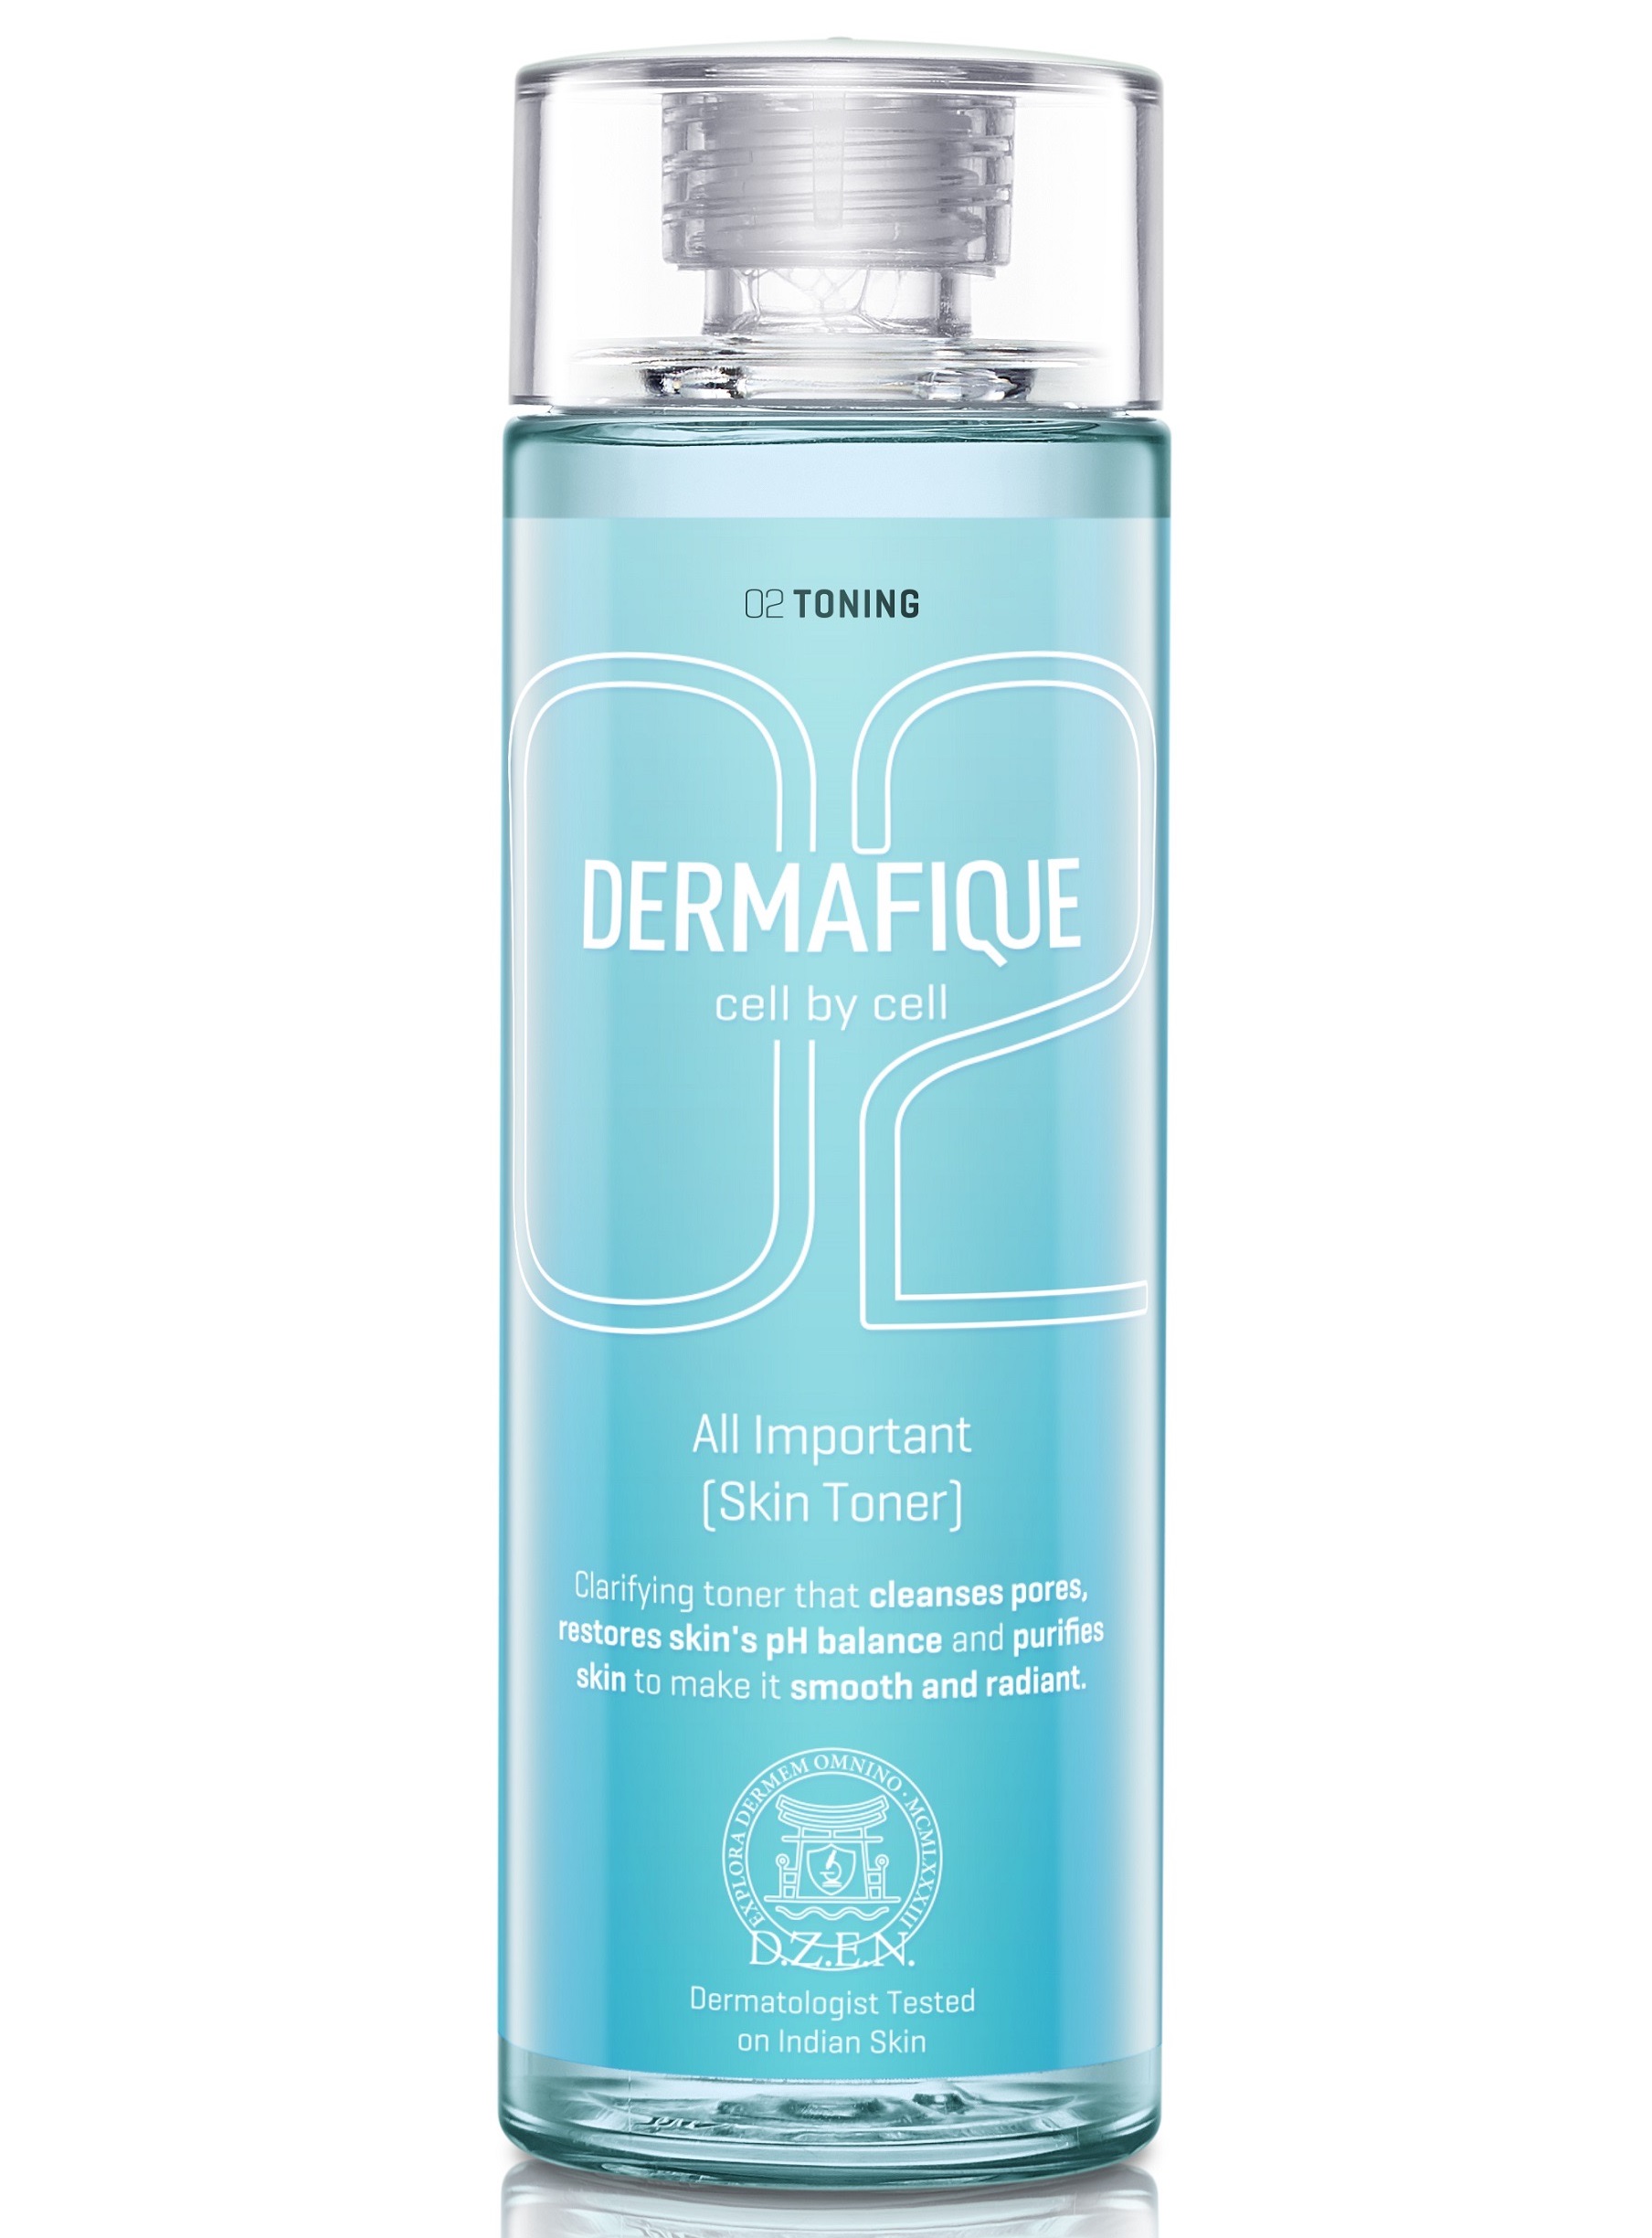 Dermafique Cell by Cell – All Important Skin Toner, 150 ml